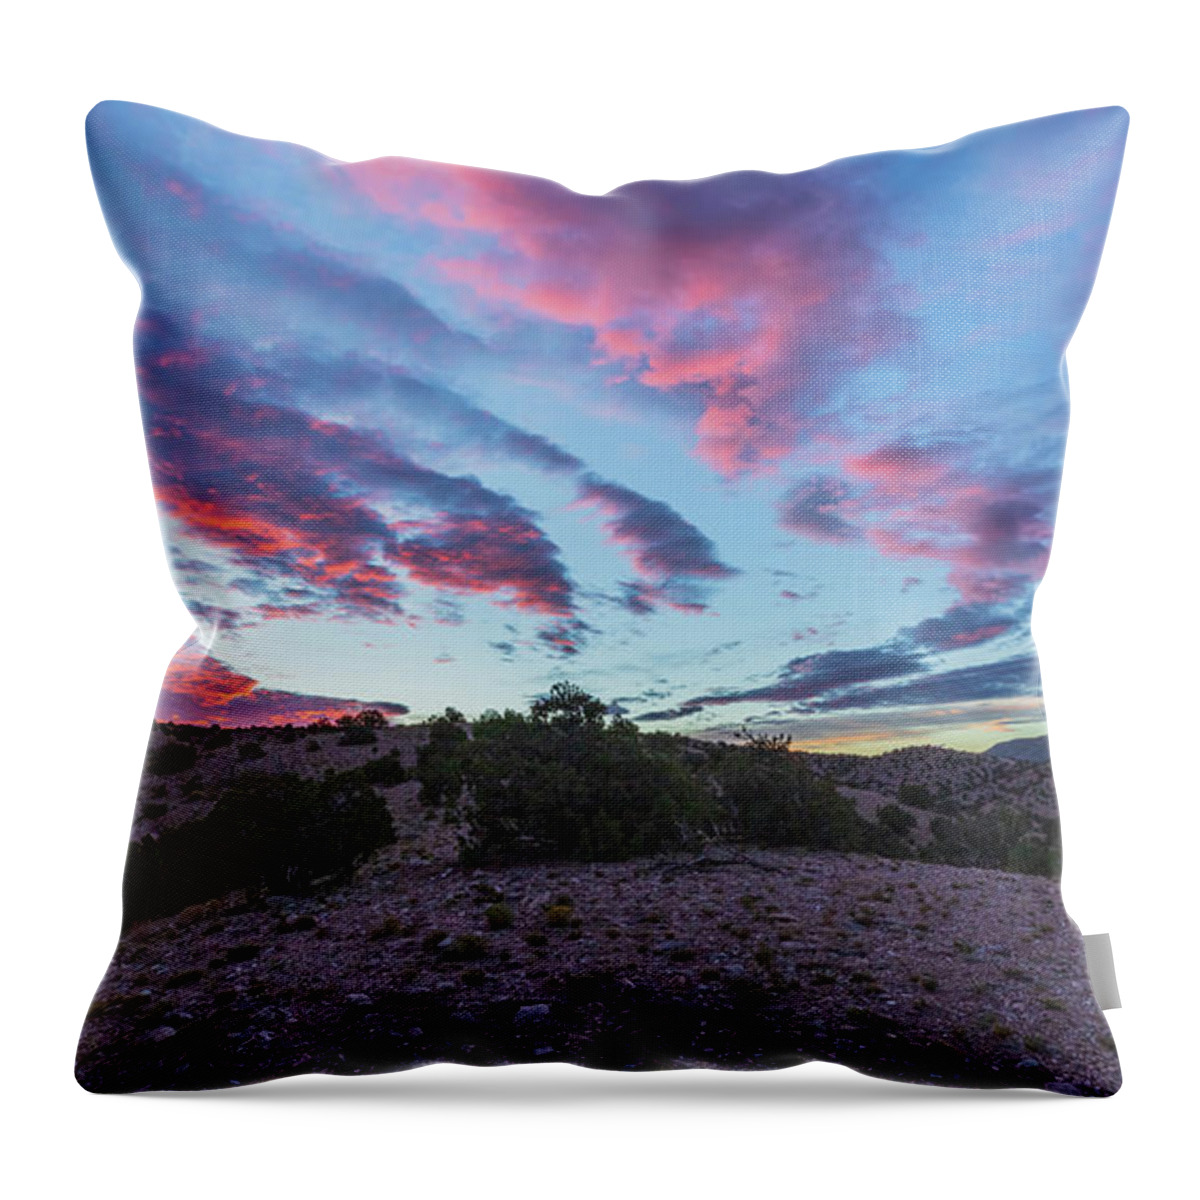 Landscape Throw Pillow featuring the photograph Summer Morning by Seth Betterly